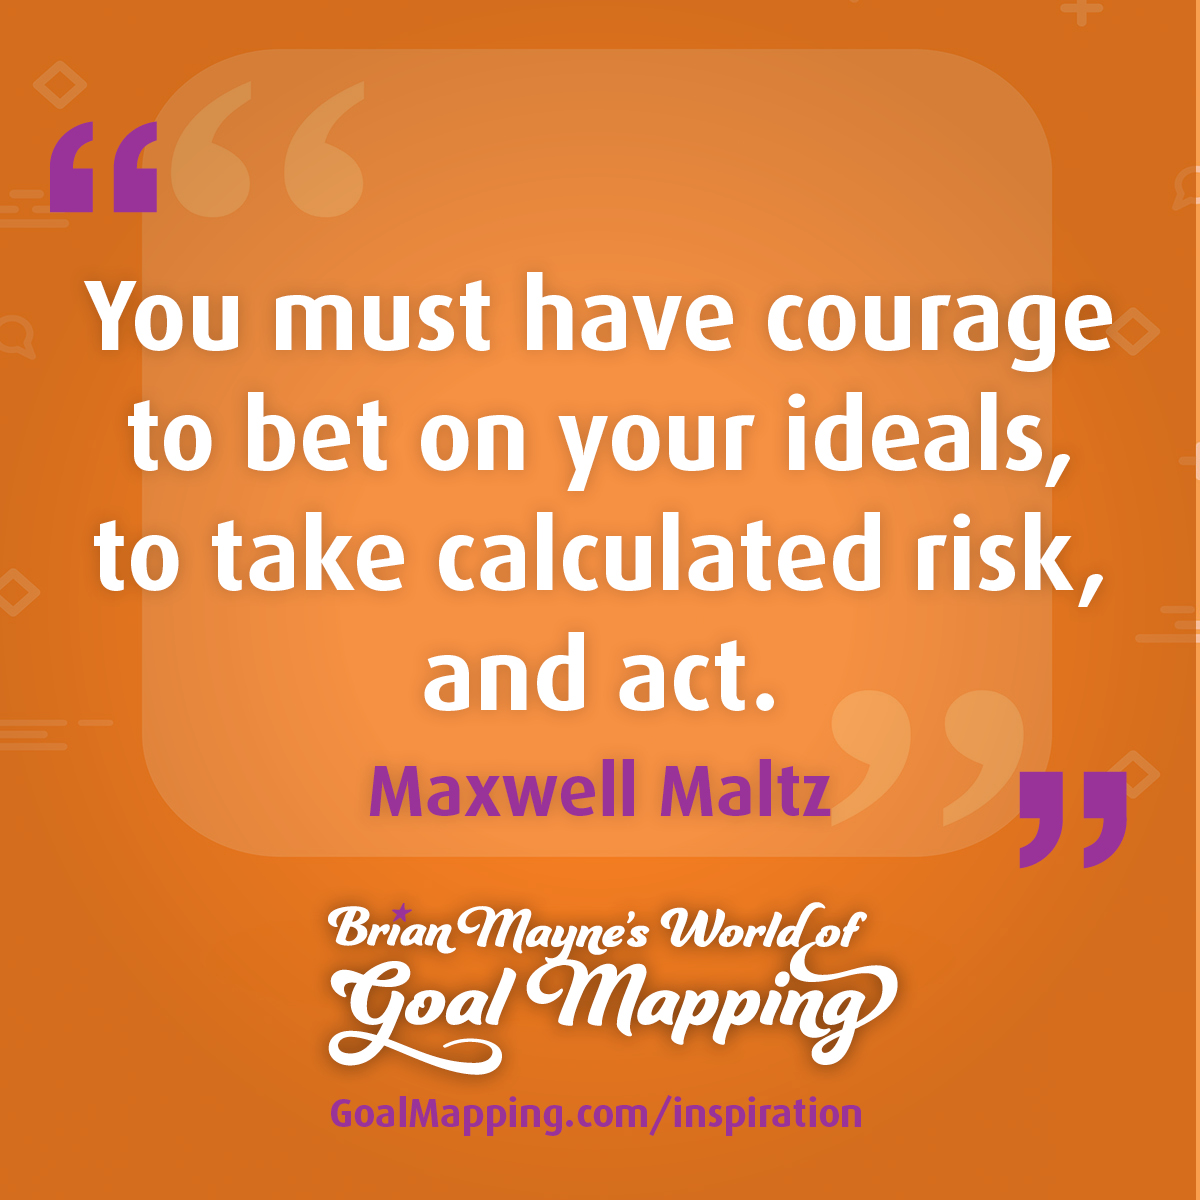 "You must have courage to bet on your ideals, to take calculated risk, and act." Maxwell Maltz